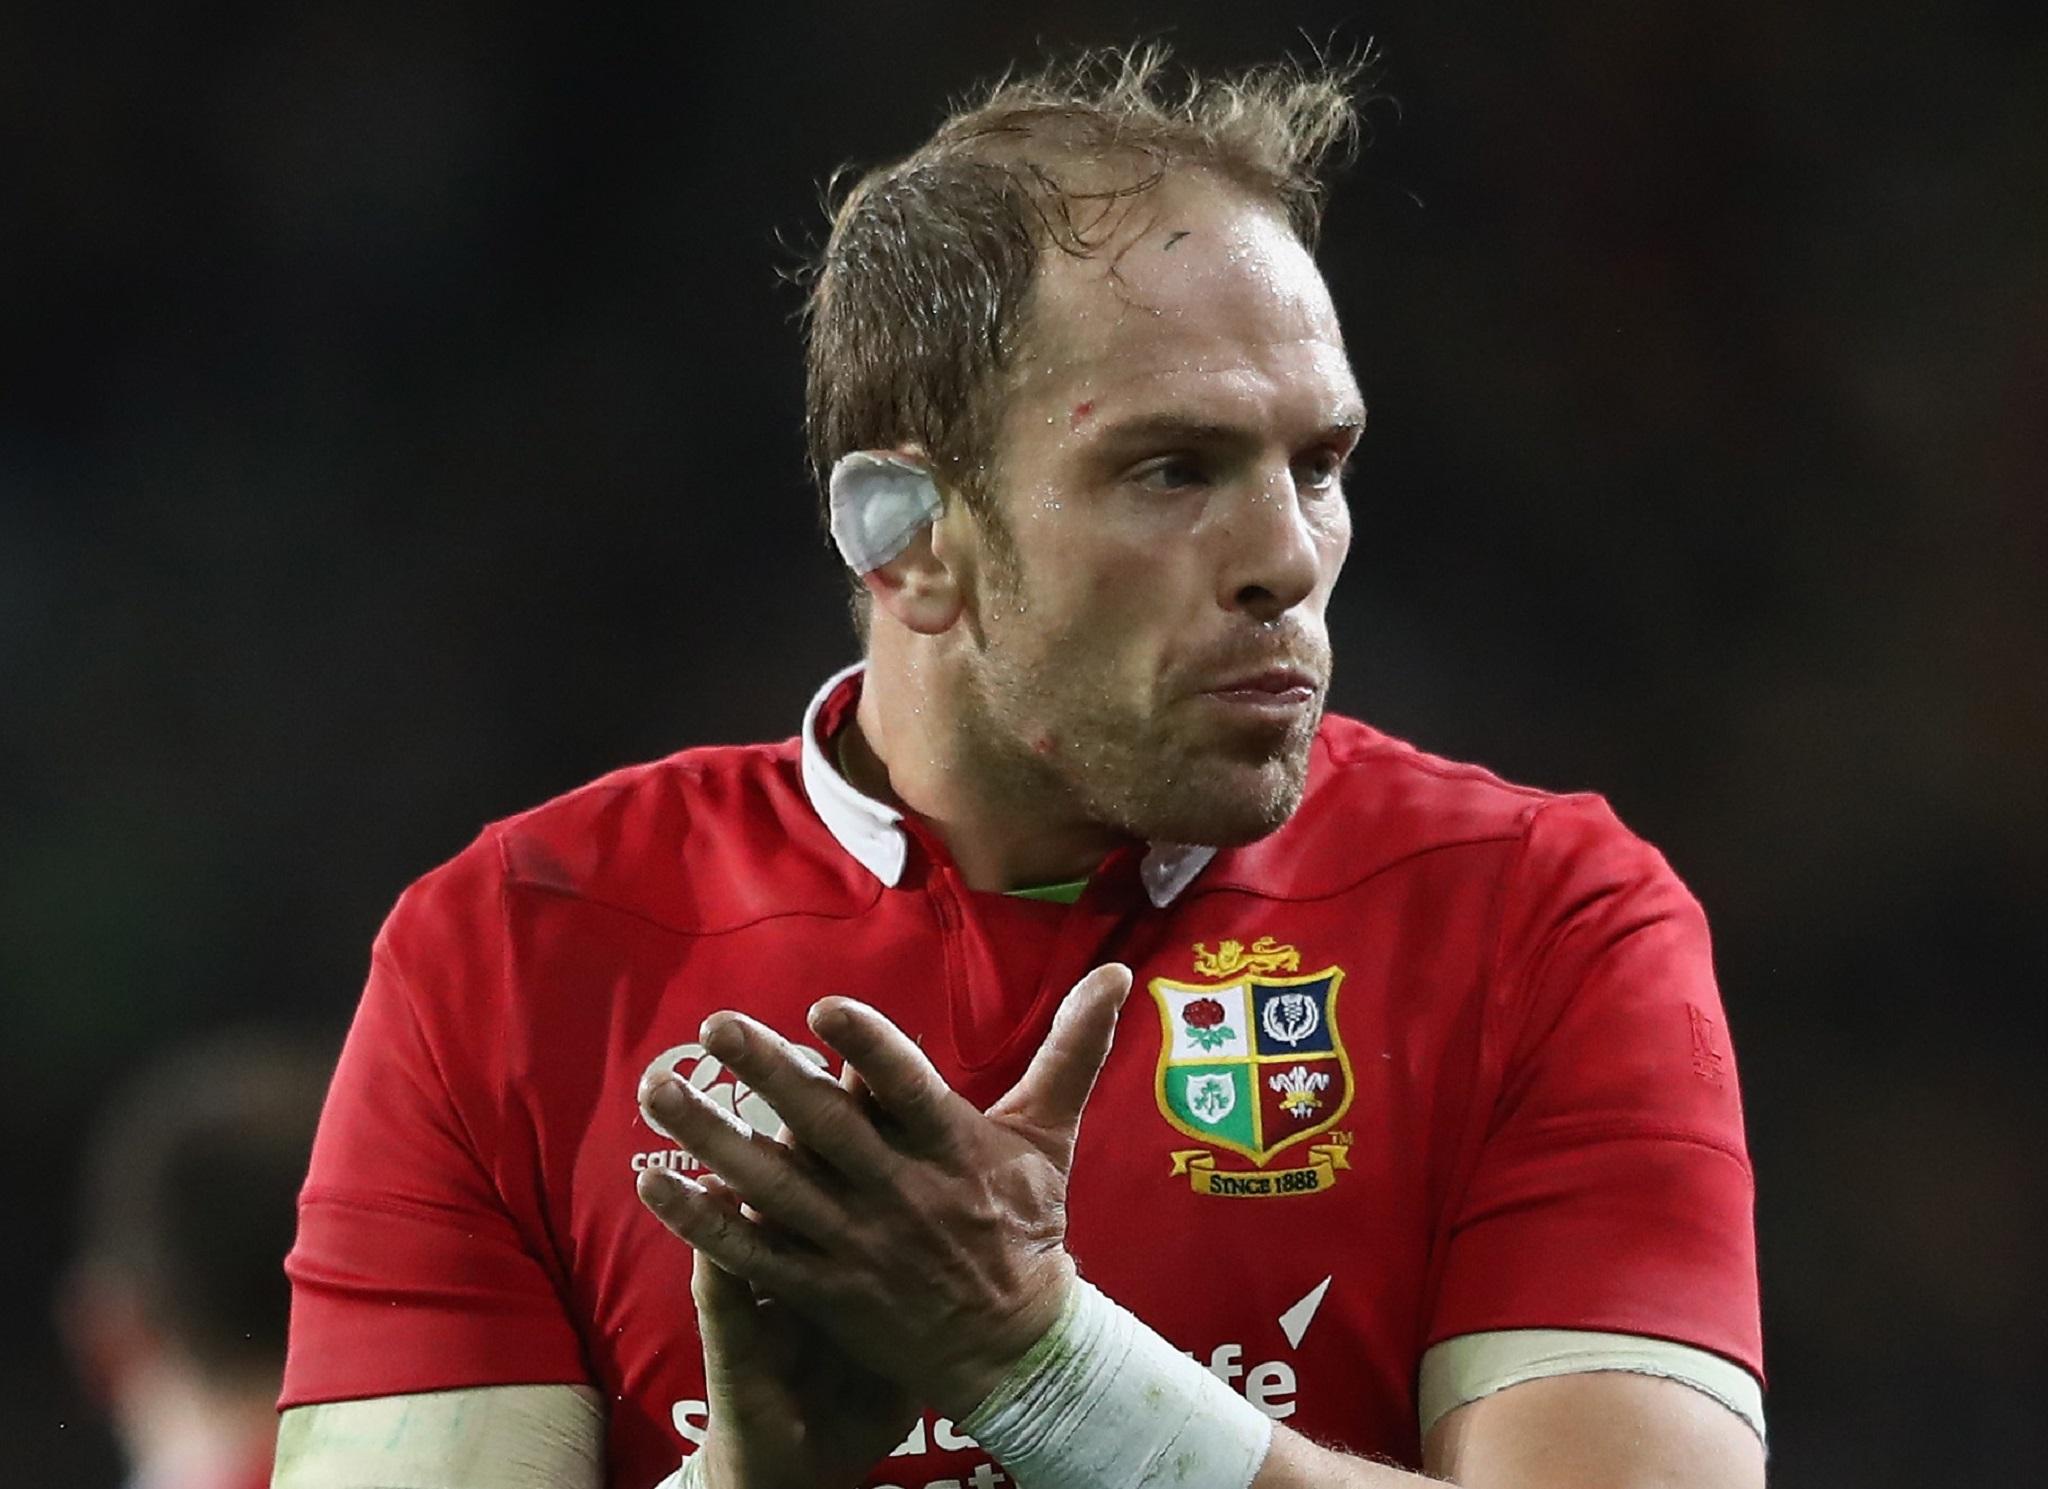 Jones proved why Gatland was right to stick with him for the second Test